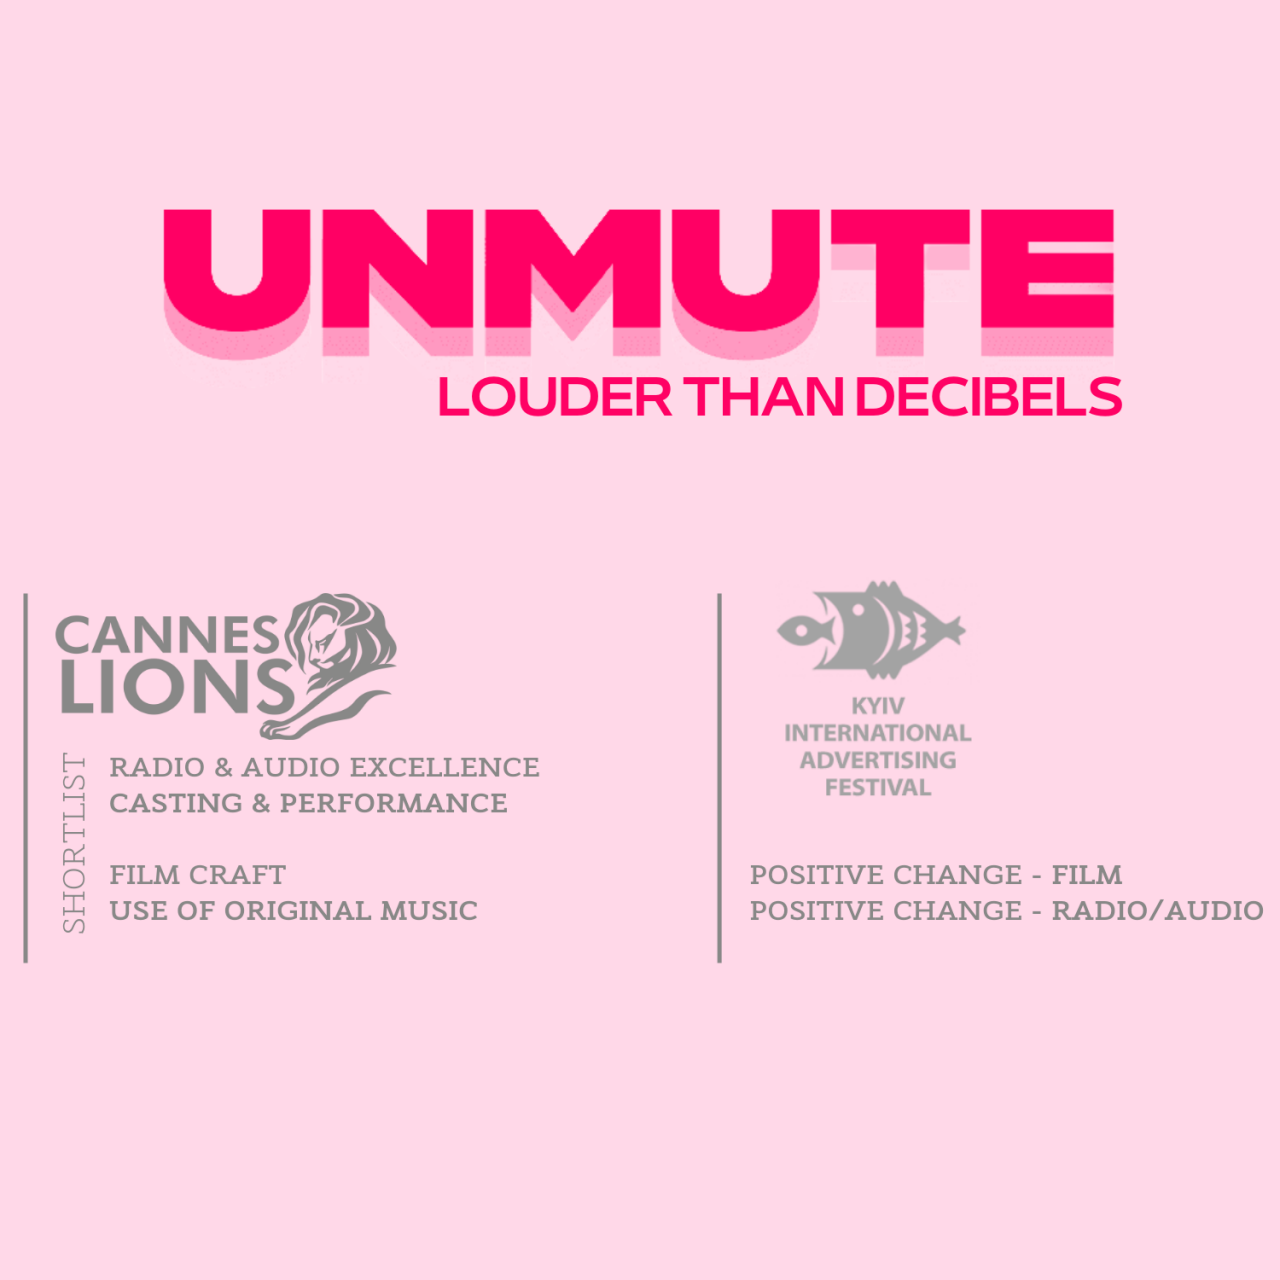 4 international awards for "unmute" campaign. 